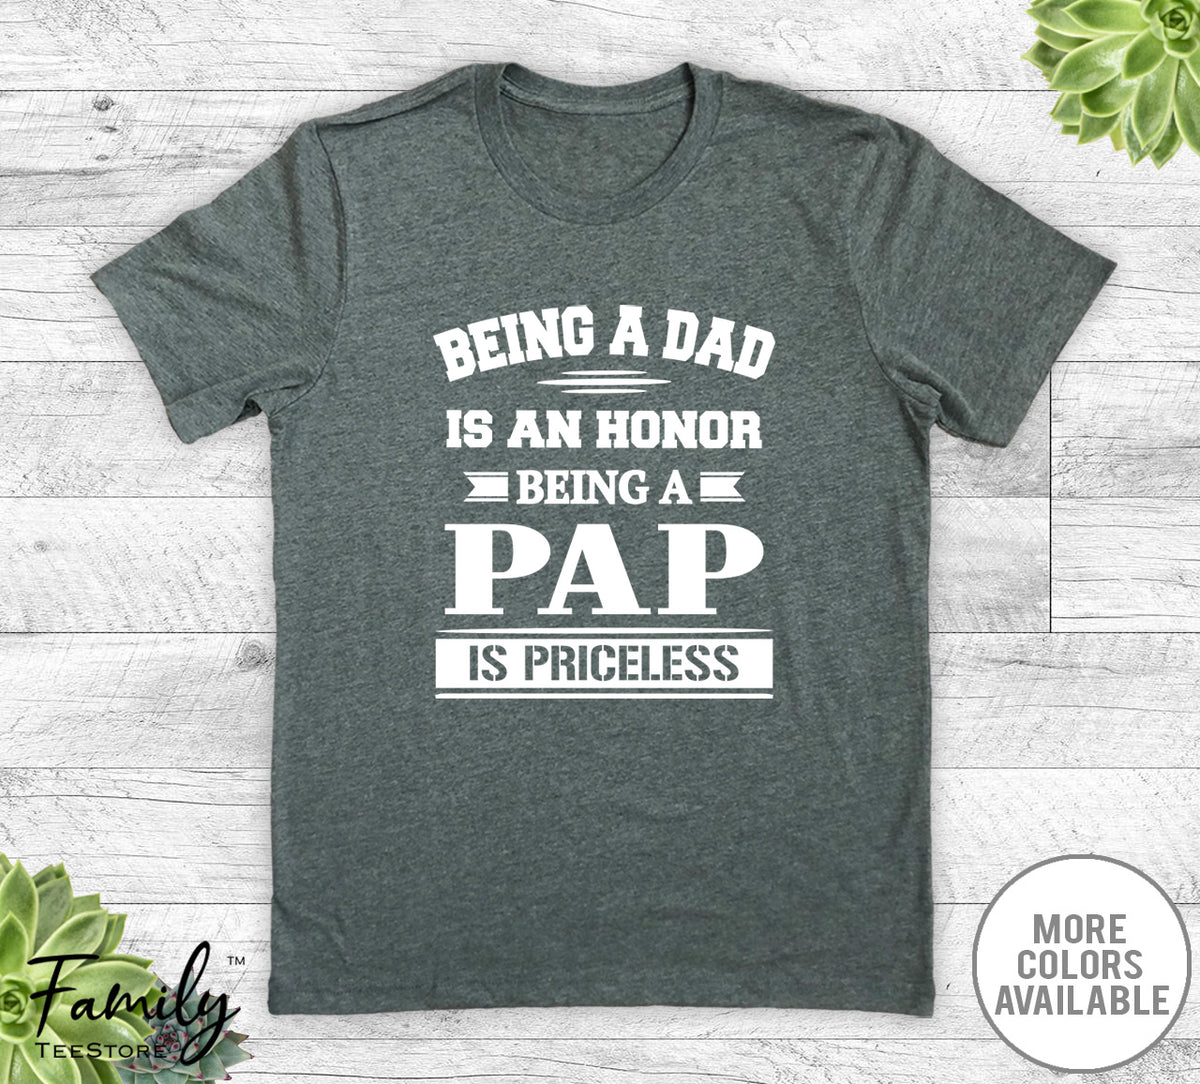 Being A Dad Is An Honor Being A Pap Is Priceless - Unisex T-shirt - Pap Shirt - Pap Gift - familyteeprints